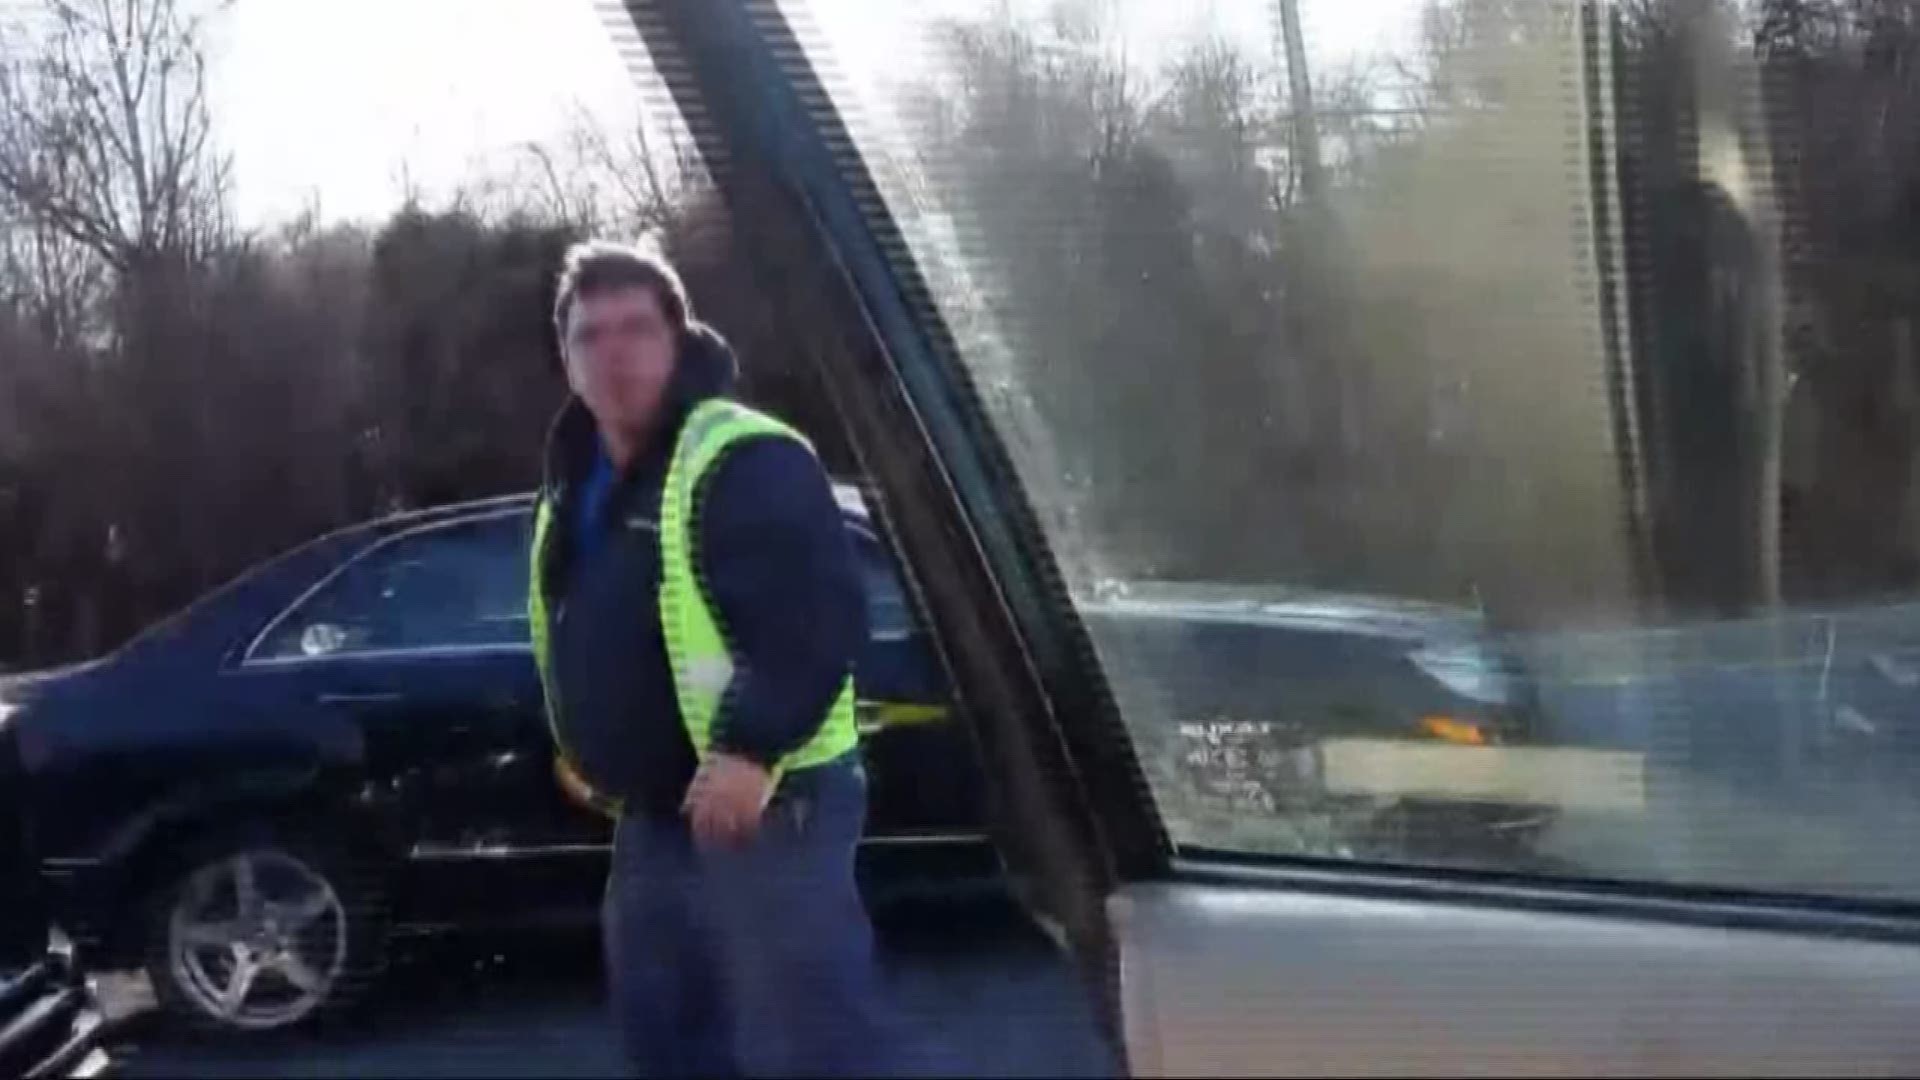 This road rage video captured in Maryland ... is getting a lot of attention on Twitter. More than 375 thousand views and counting. Our Jess Arnold met up with the driver behind the camera to hear from him directly about what led up to this explosive moment.